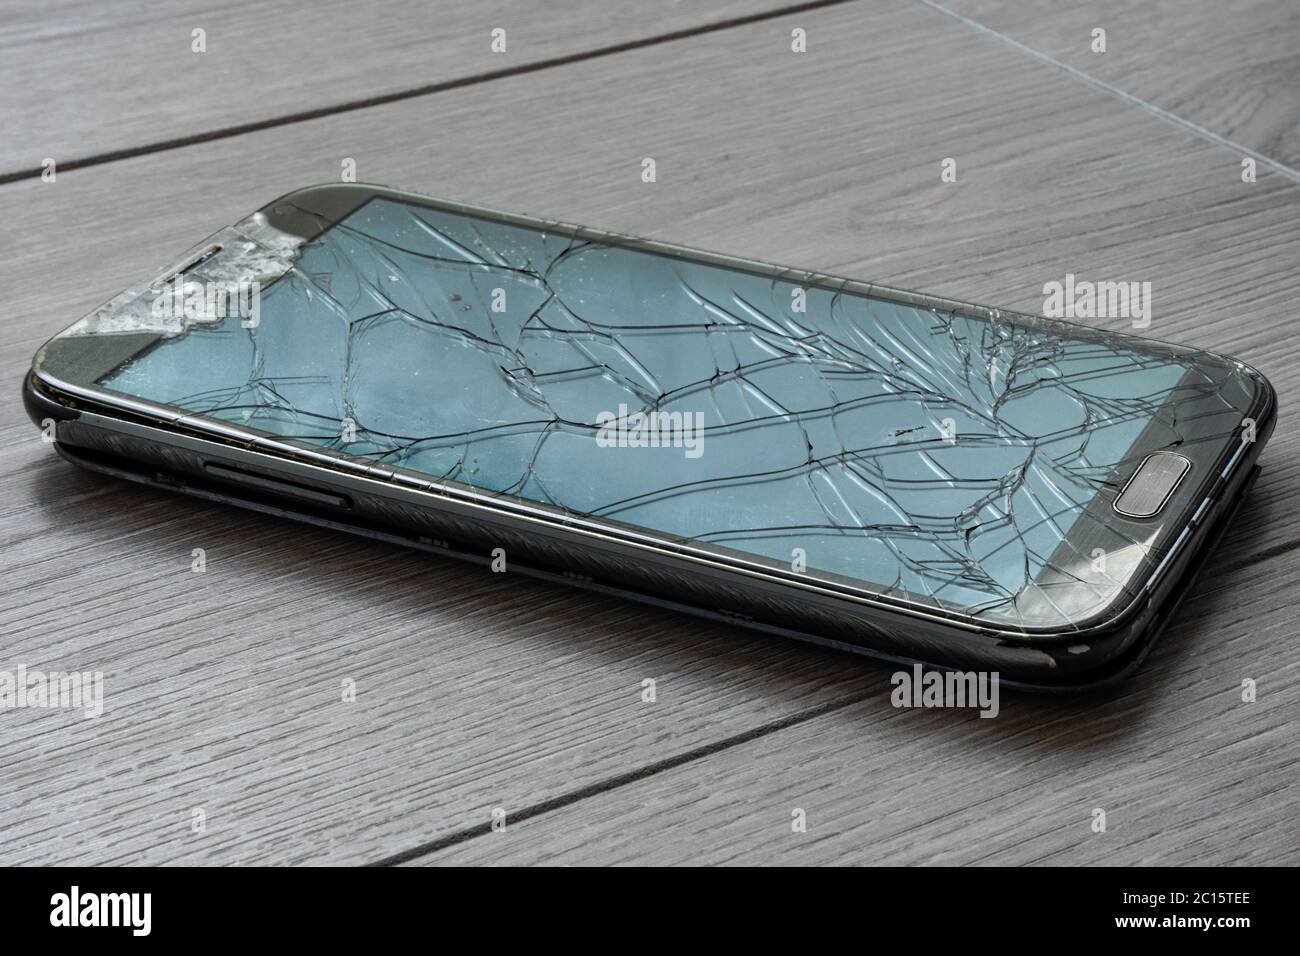 Broken smartphone on the floor. The screen is cracked and the phone is damaged. Stock Photo